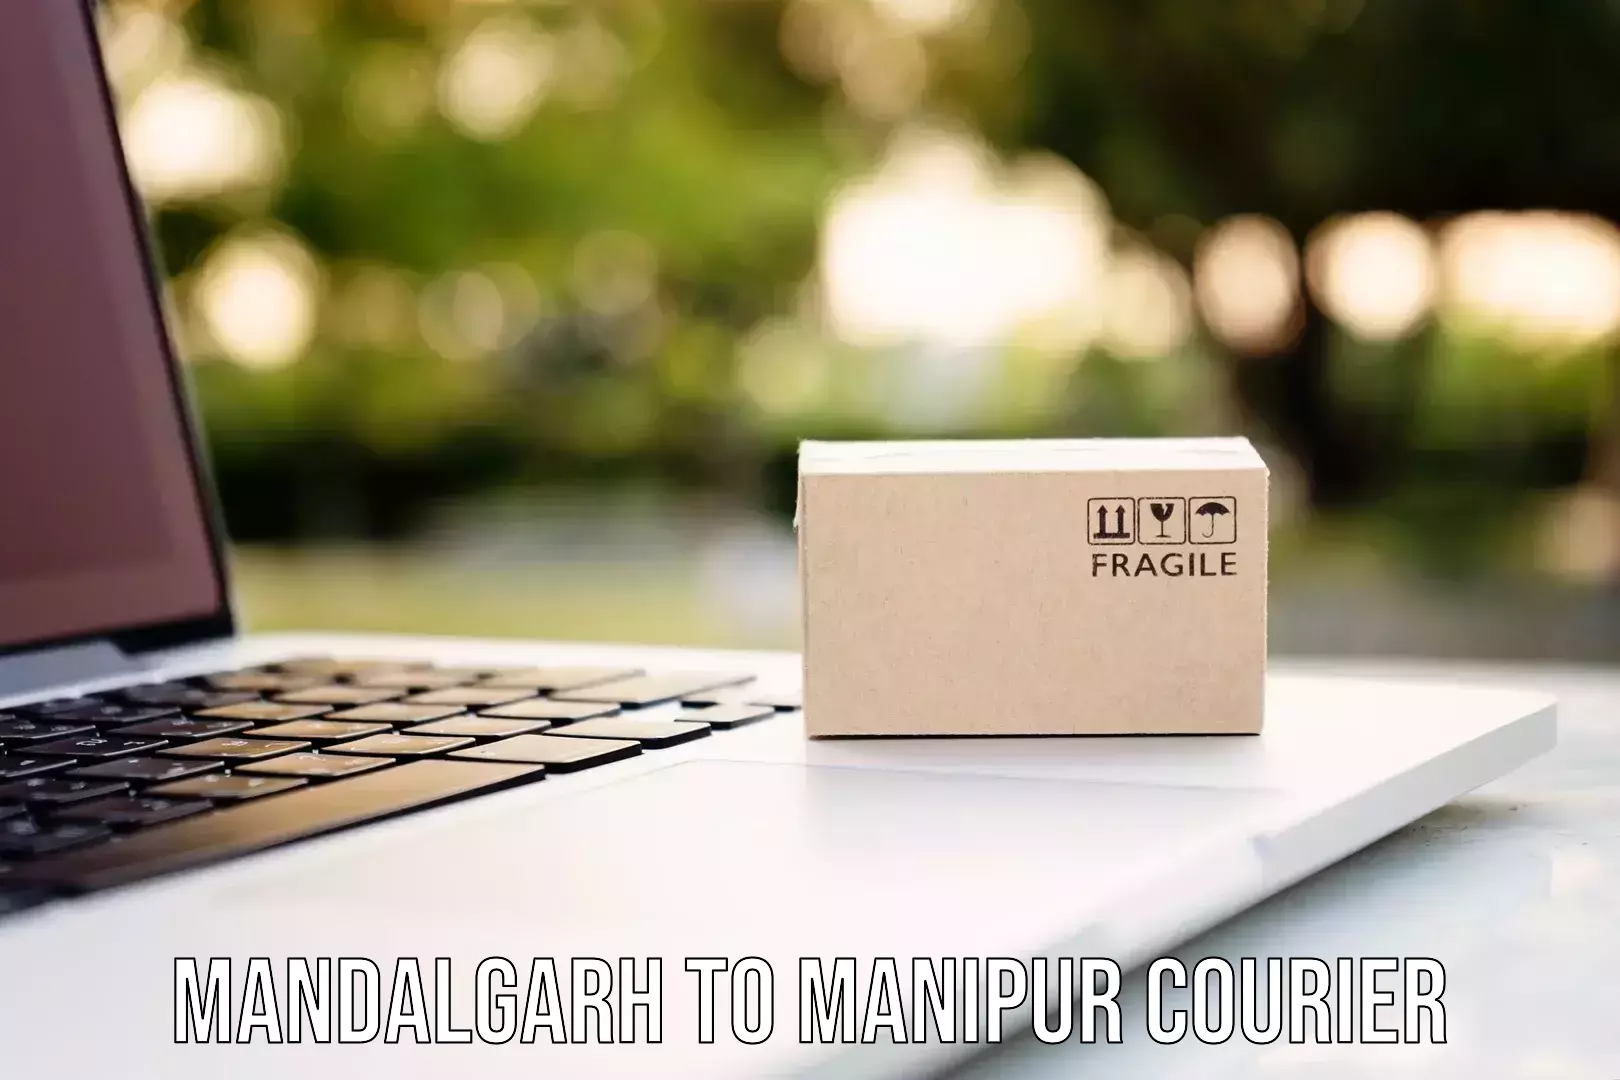 Courier service innovation Mandalgarh to Manipur